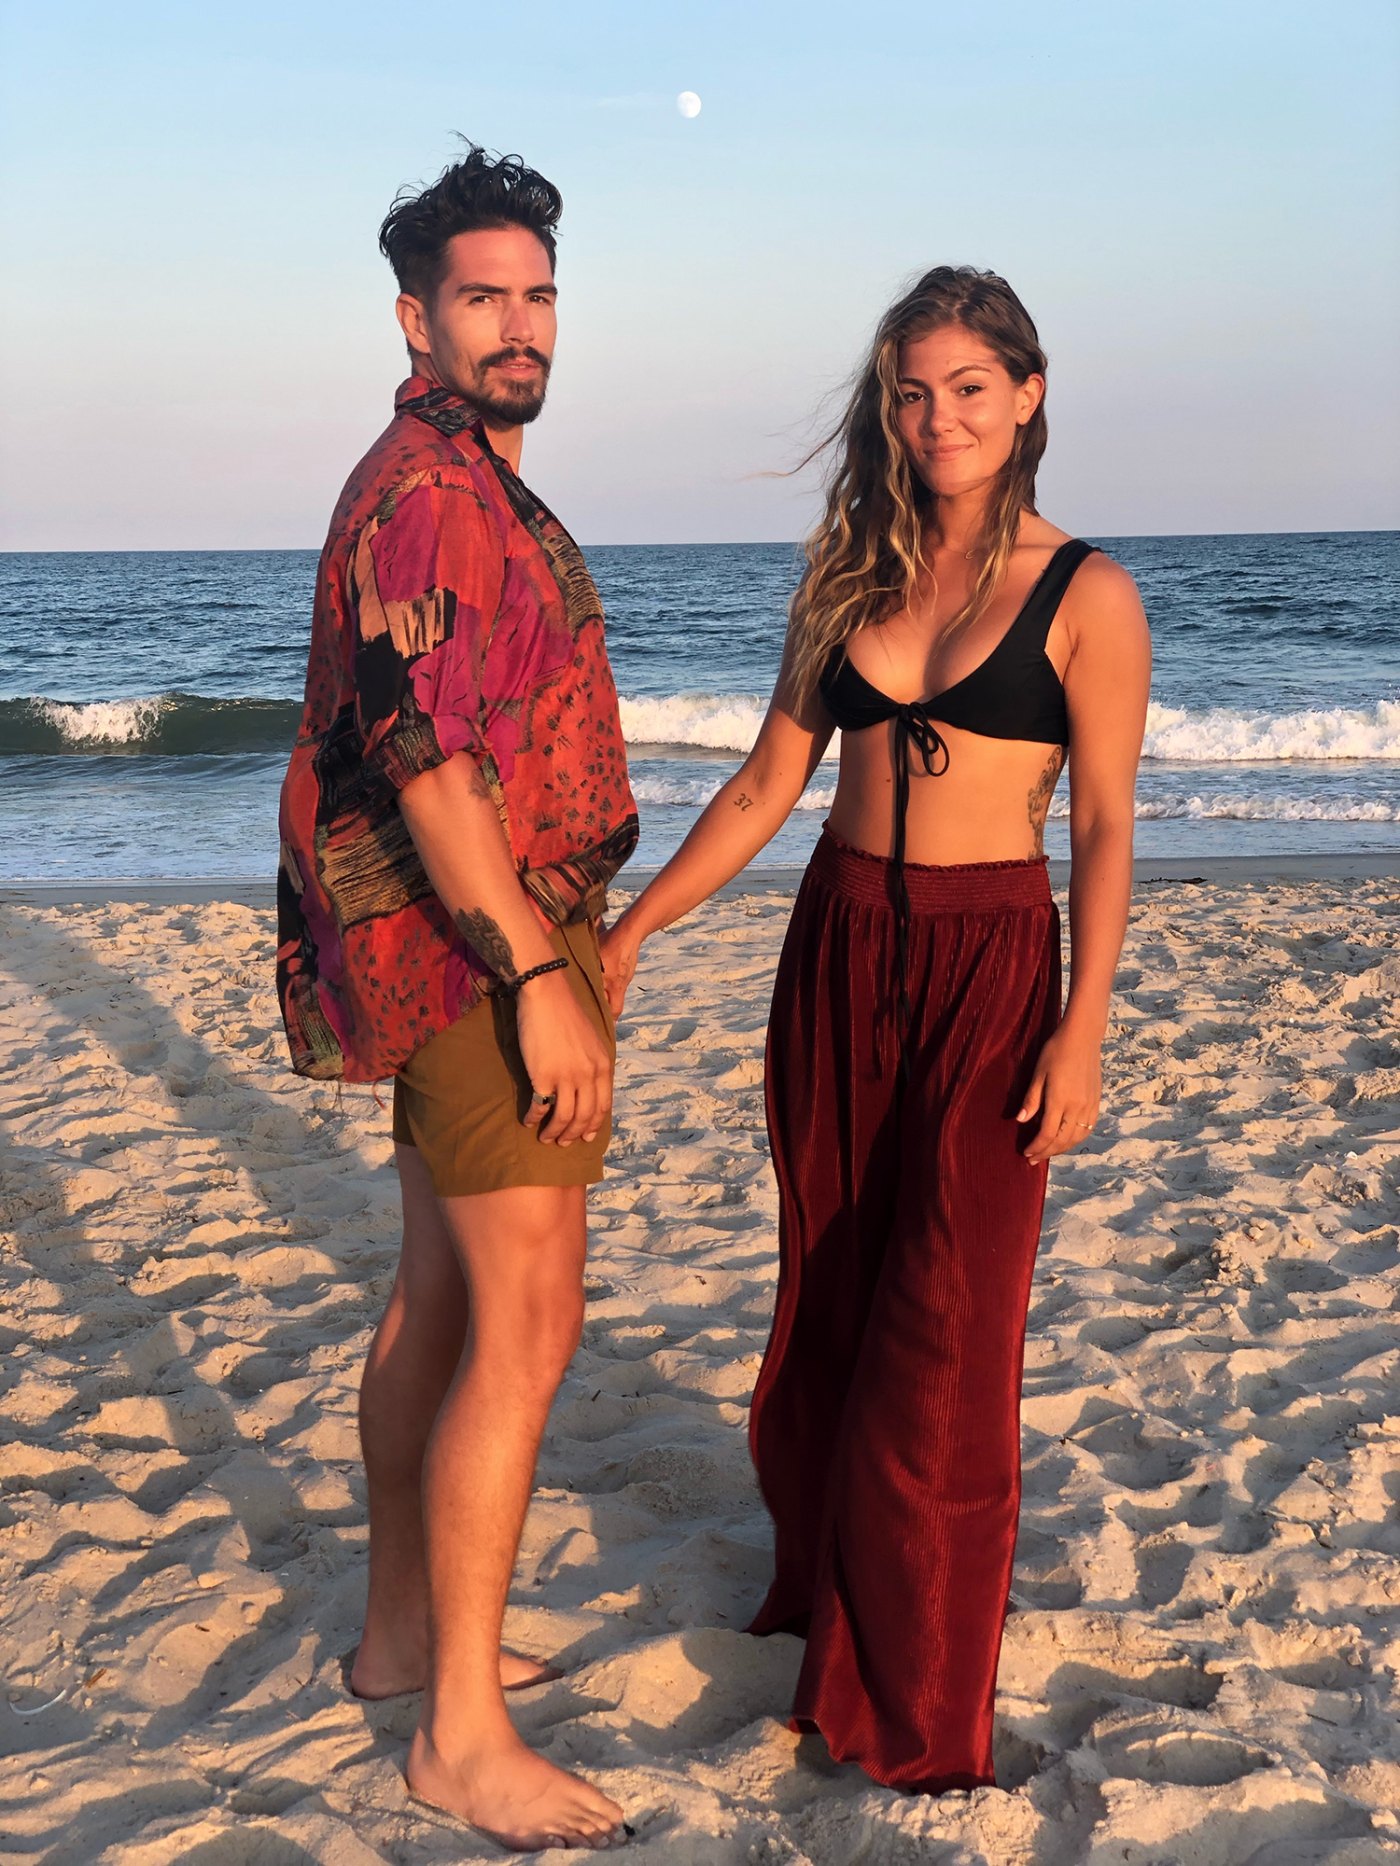 The Challenge’s Tori Deal, Jordan Wiseley Engaged — Will Air on MTV